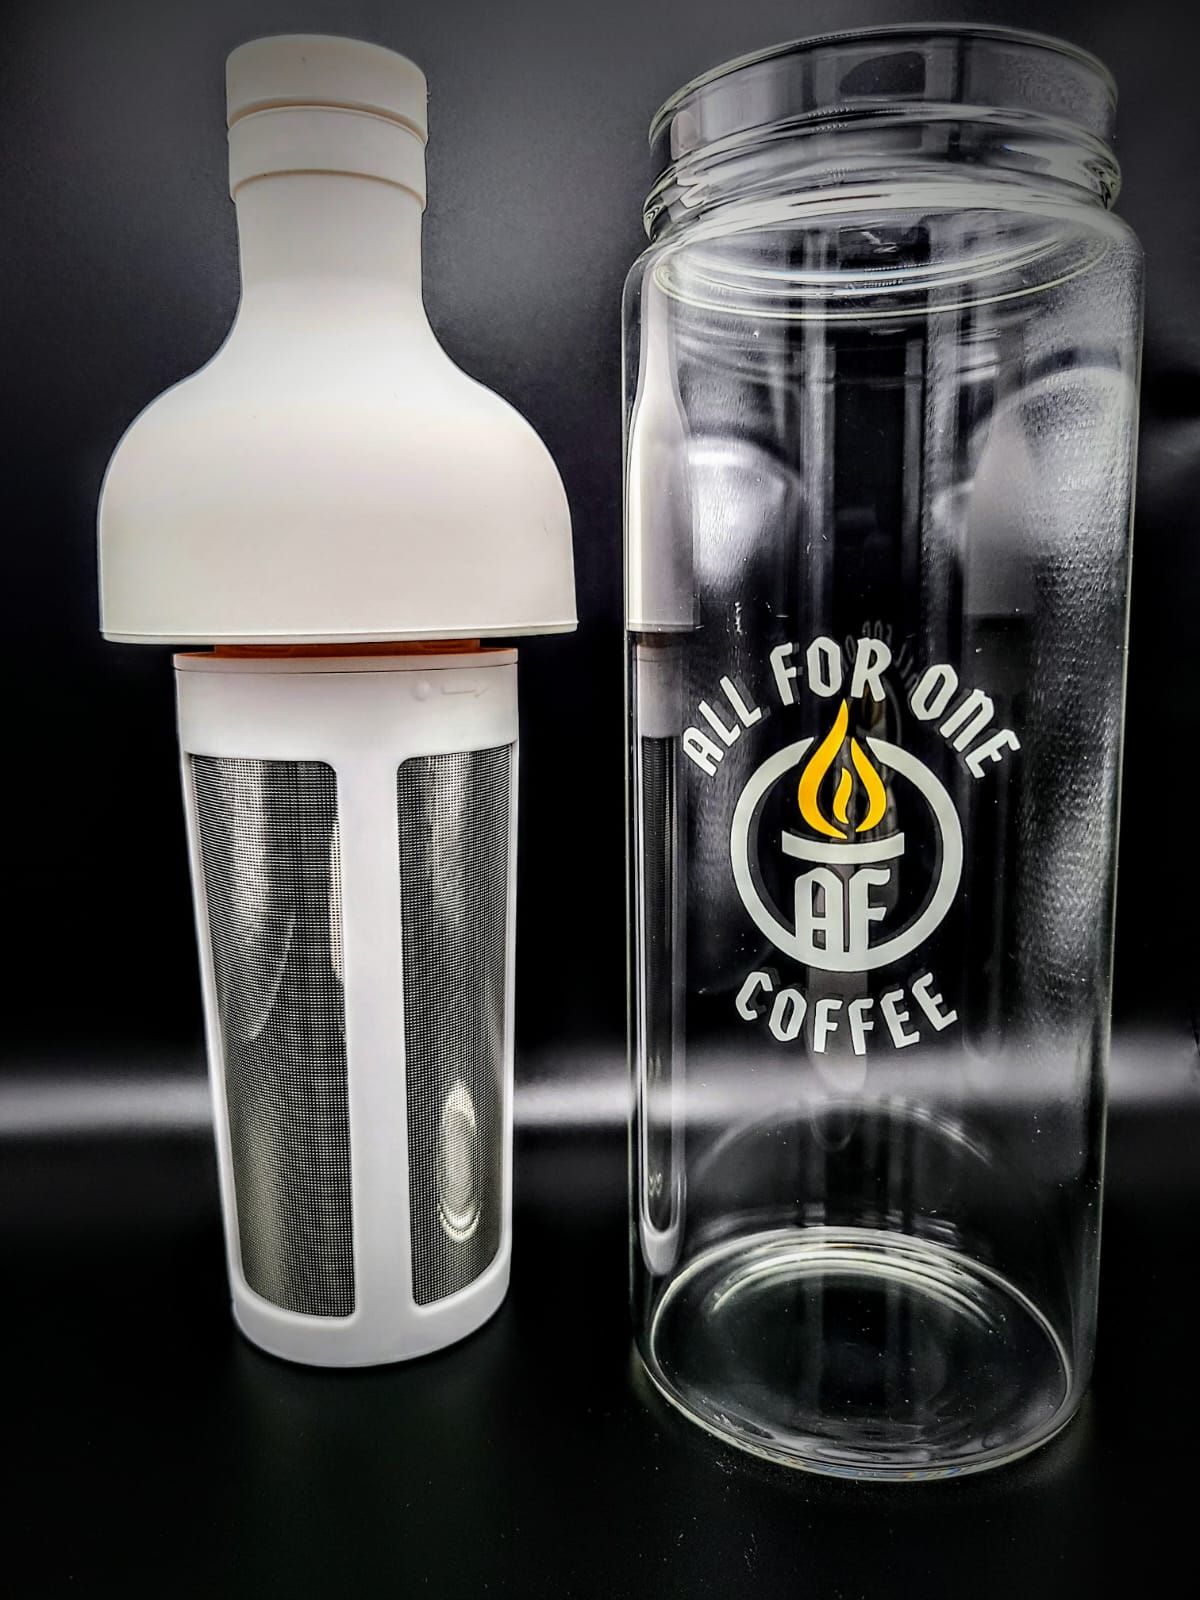 The Cold Brew Bottle by Hario